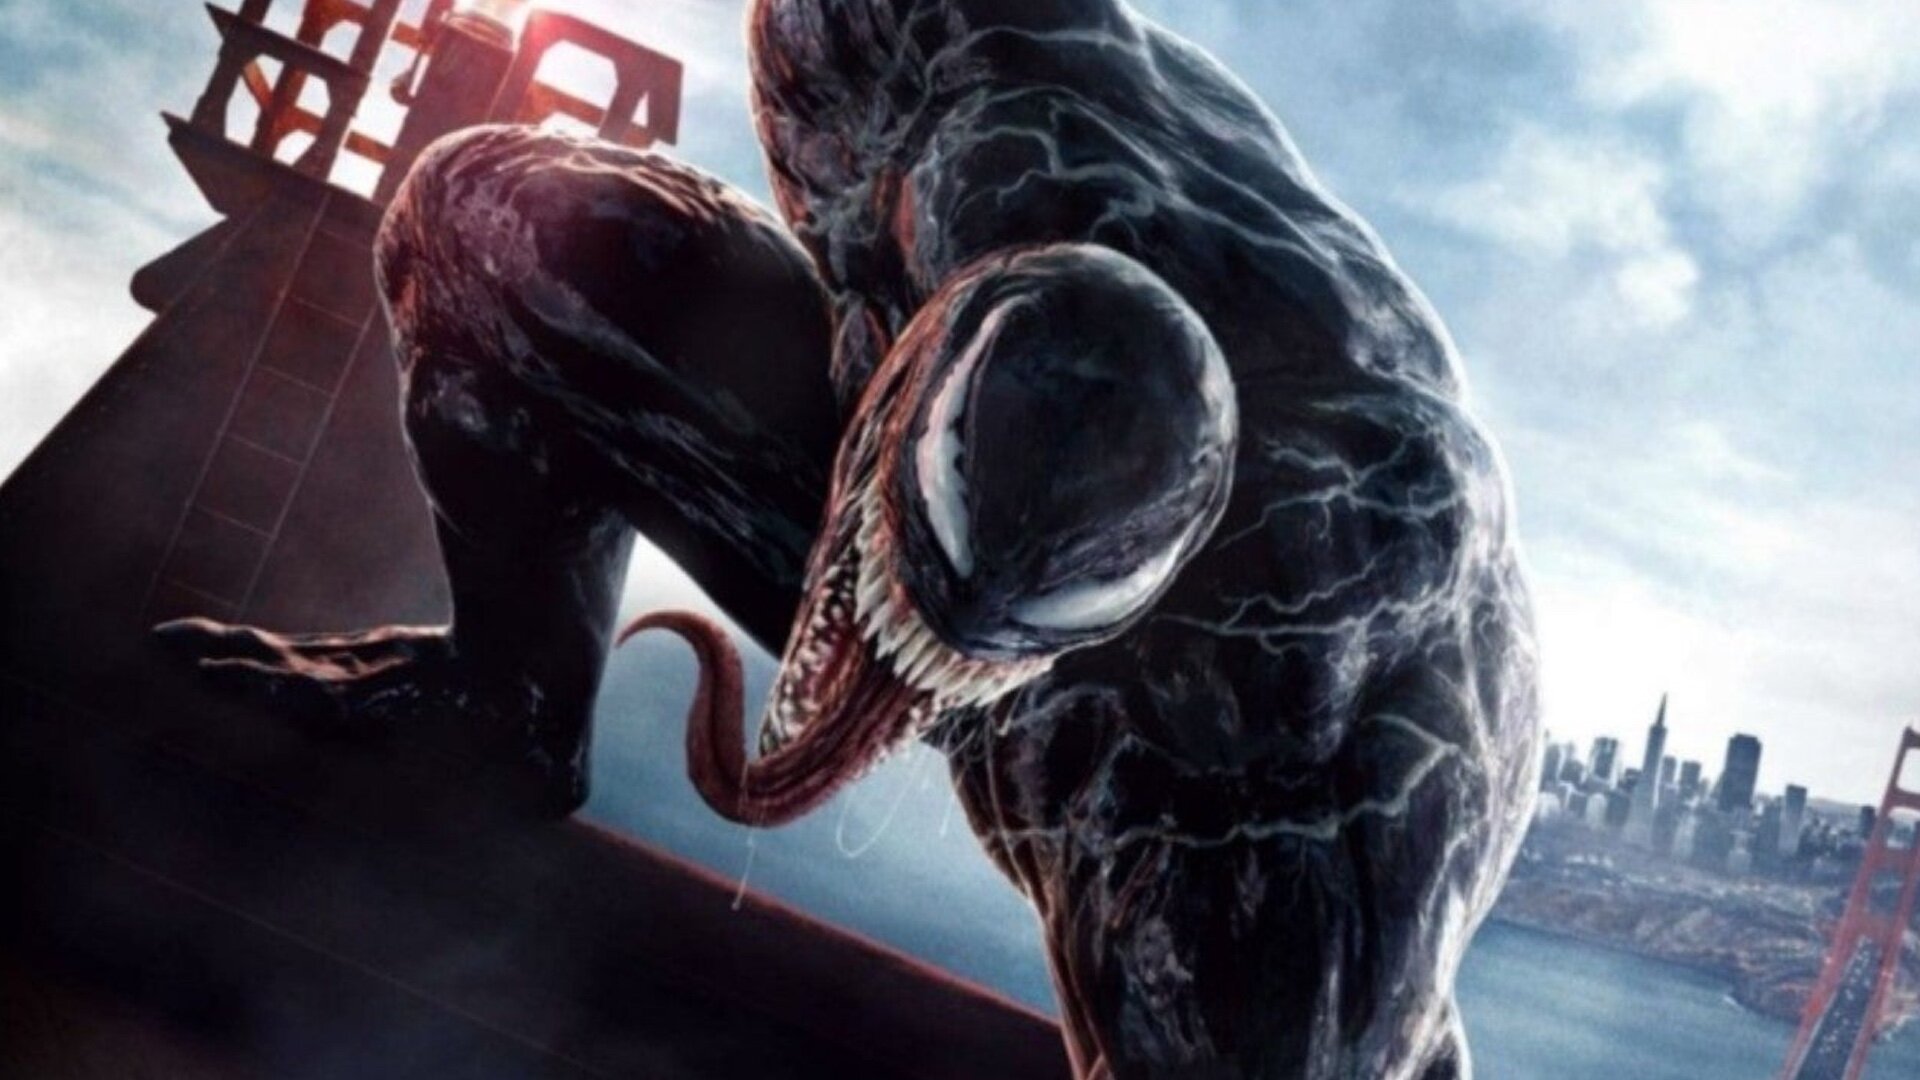 The Release Date For VENOM: LET THERE BE CARNAGE Pushed Back Again